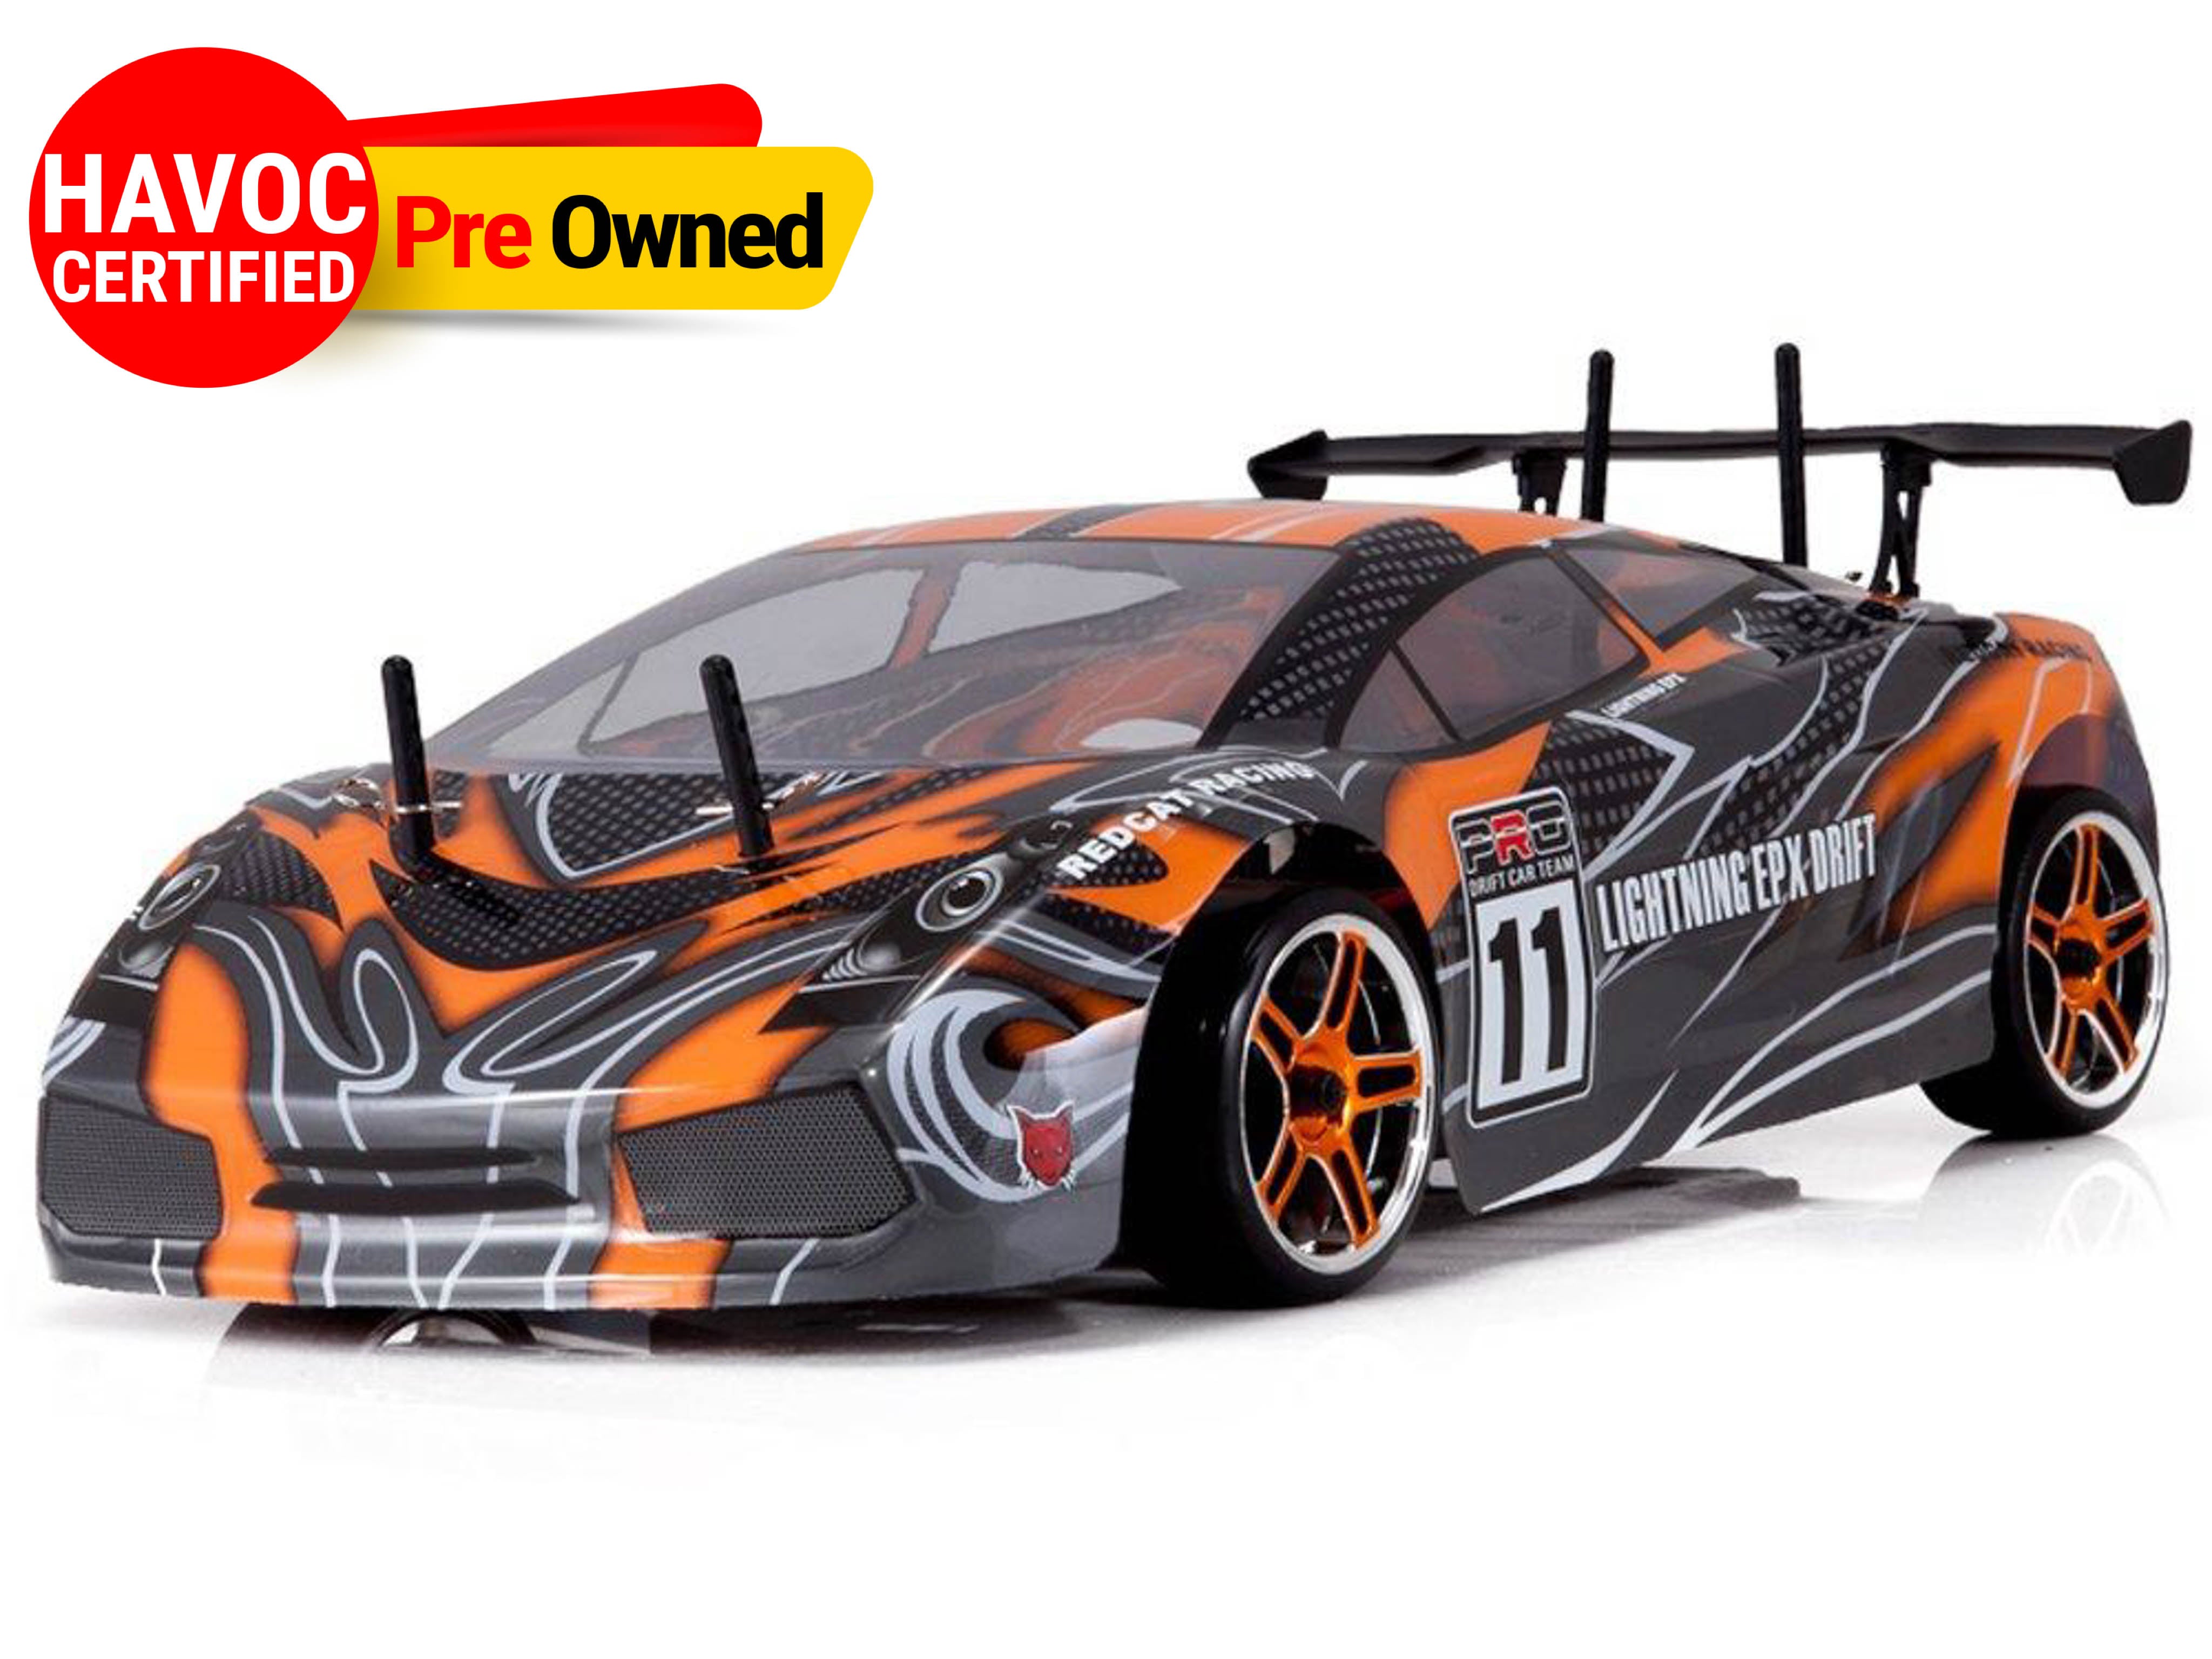 Redcat Racing Lightning Epx Drift  1/10Scale 4Wd Car(Quality Pre Owned)